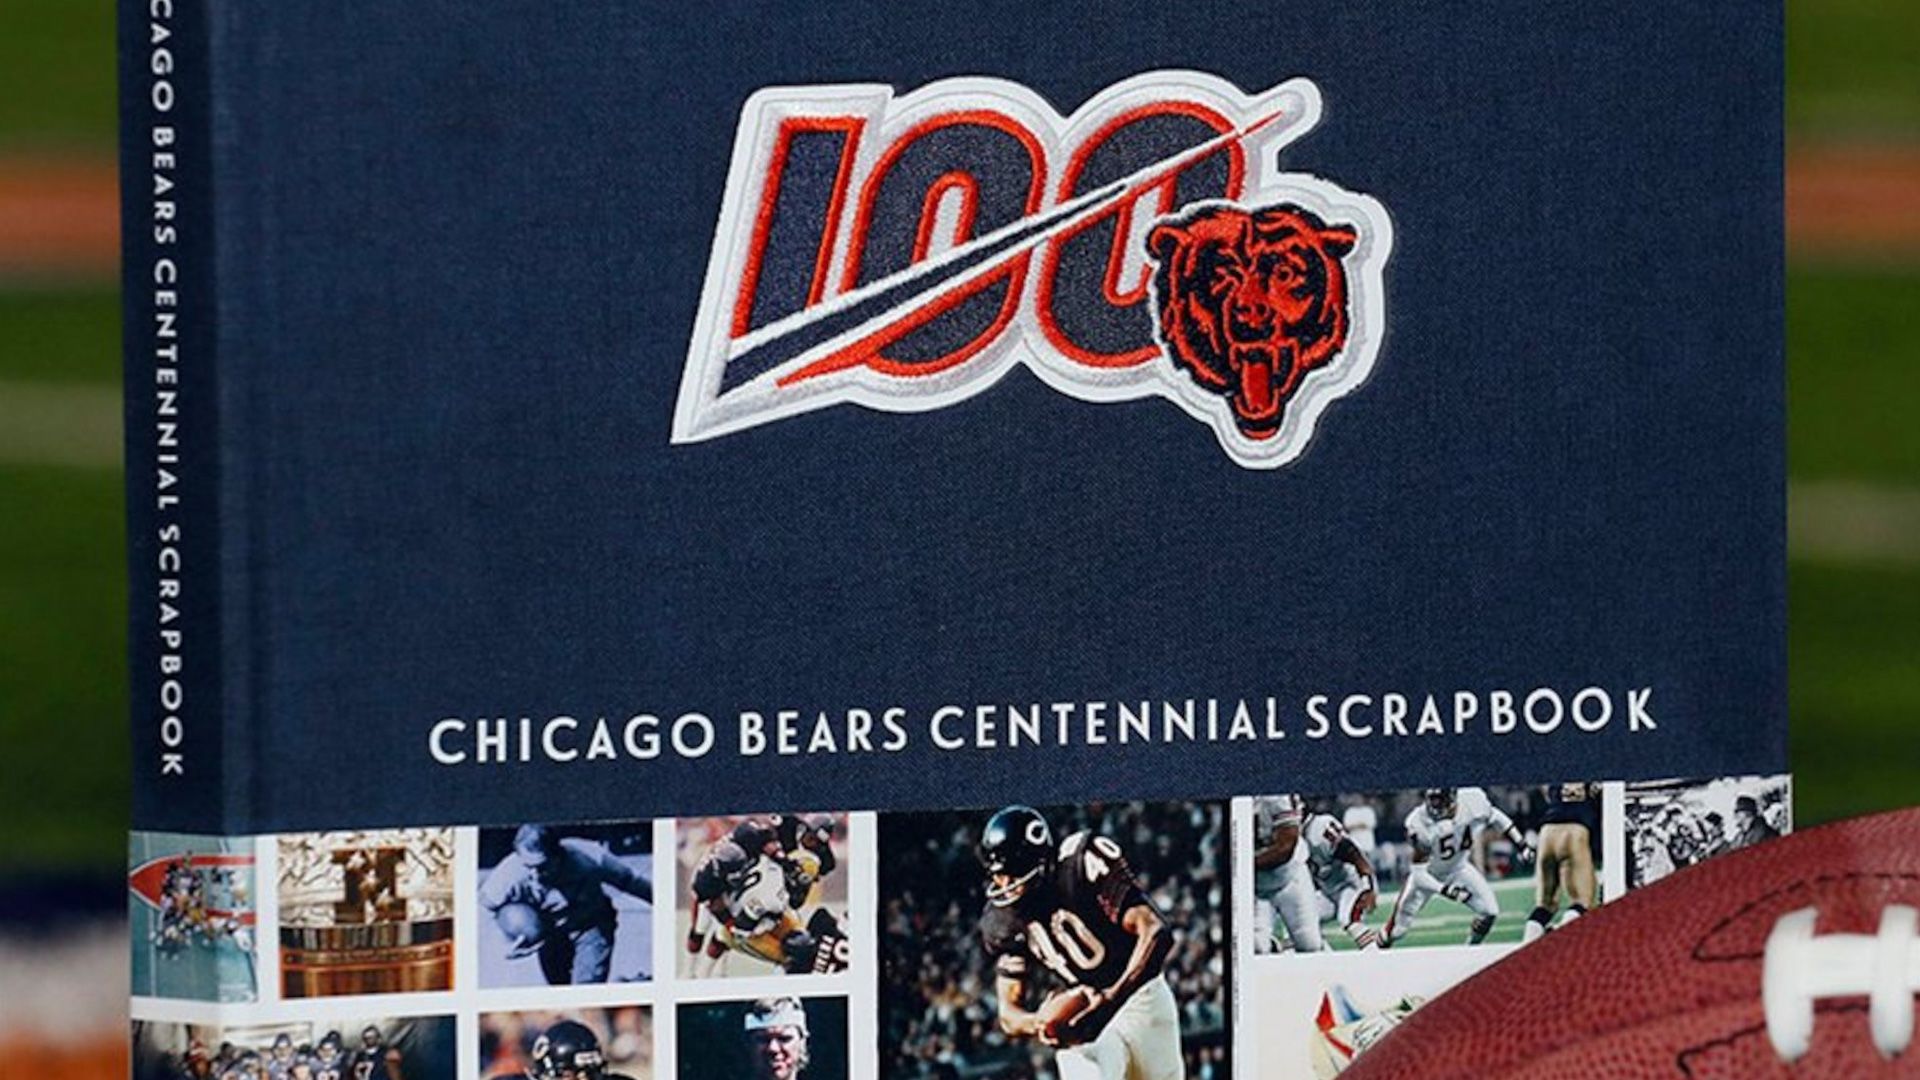 100 greatest moments in Chicago Bears history